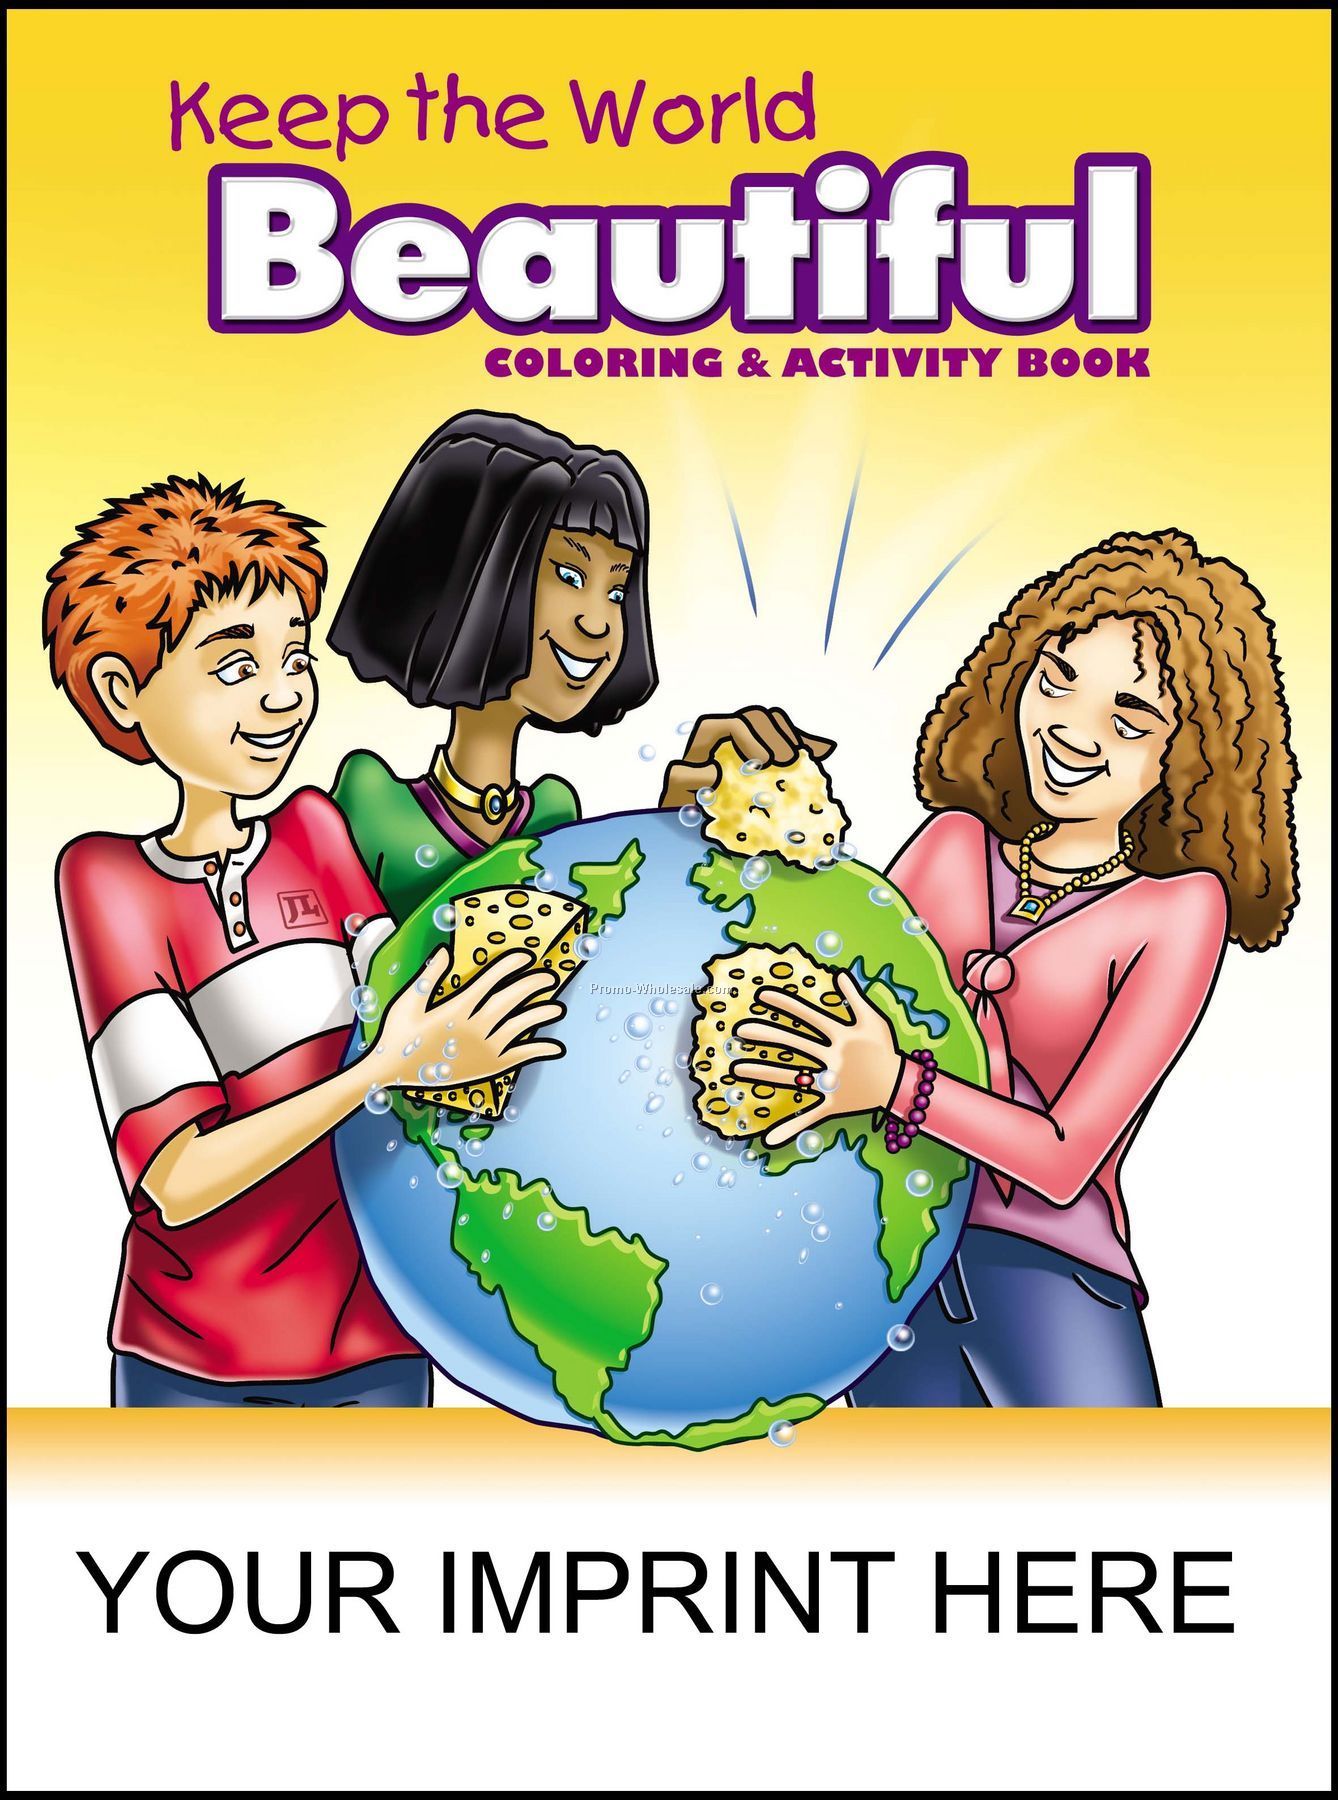 The World Beautiful Coloring & Activity Book